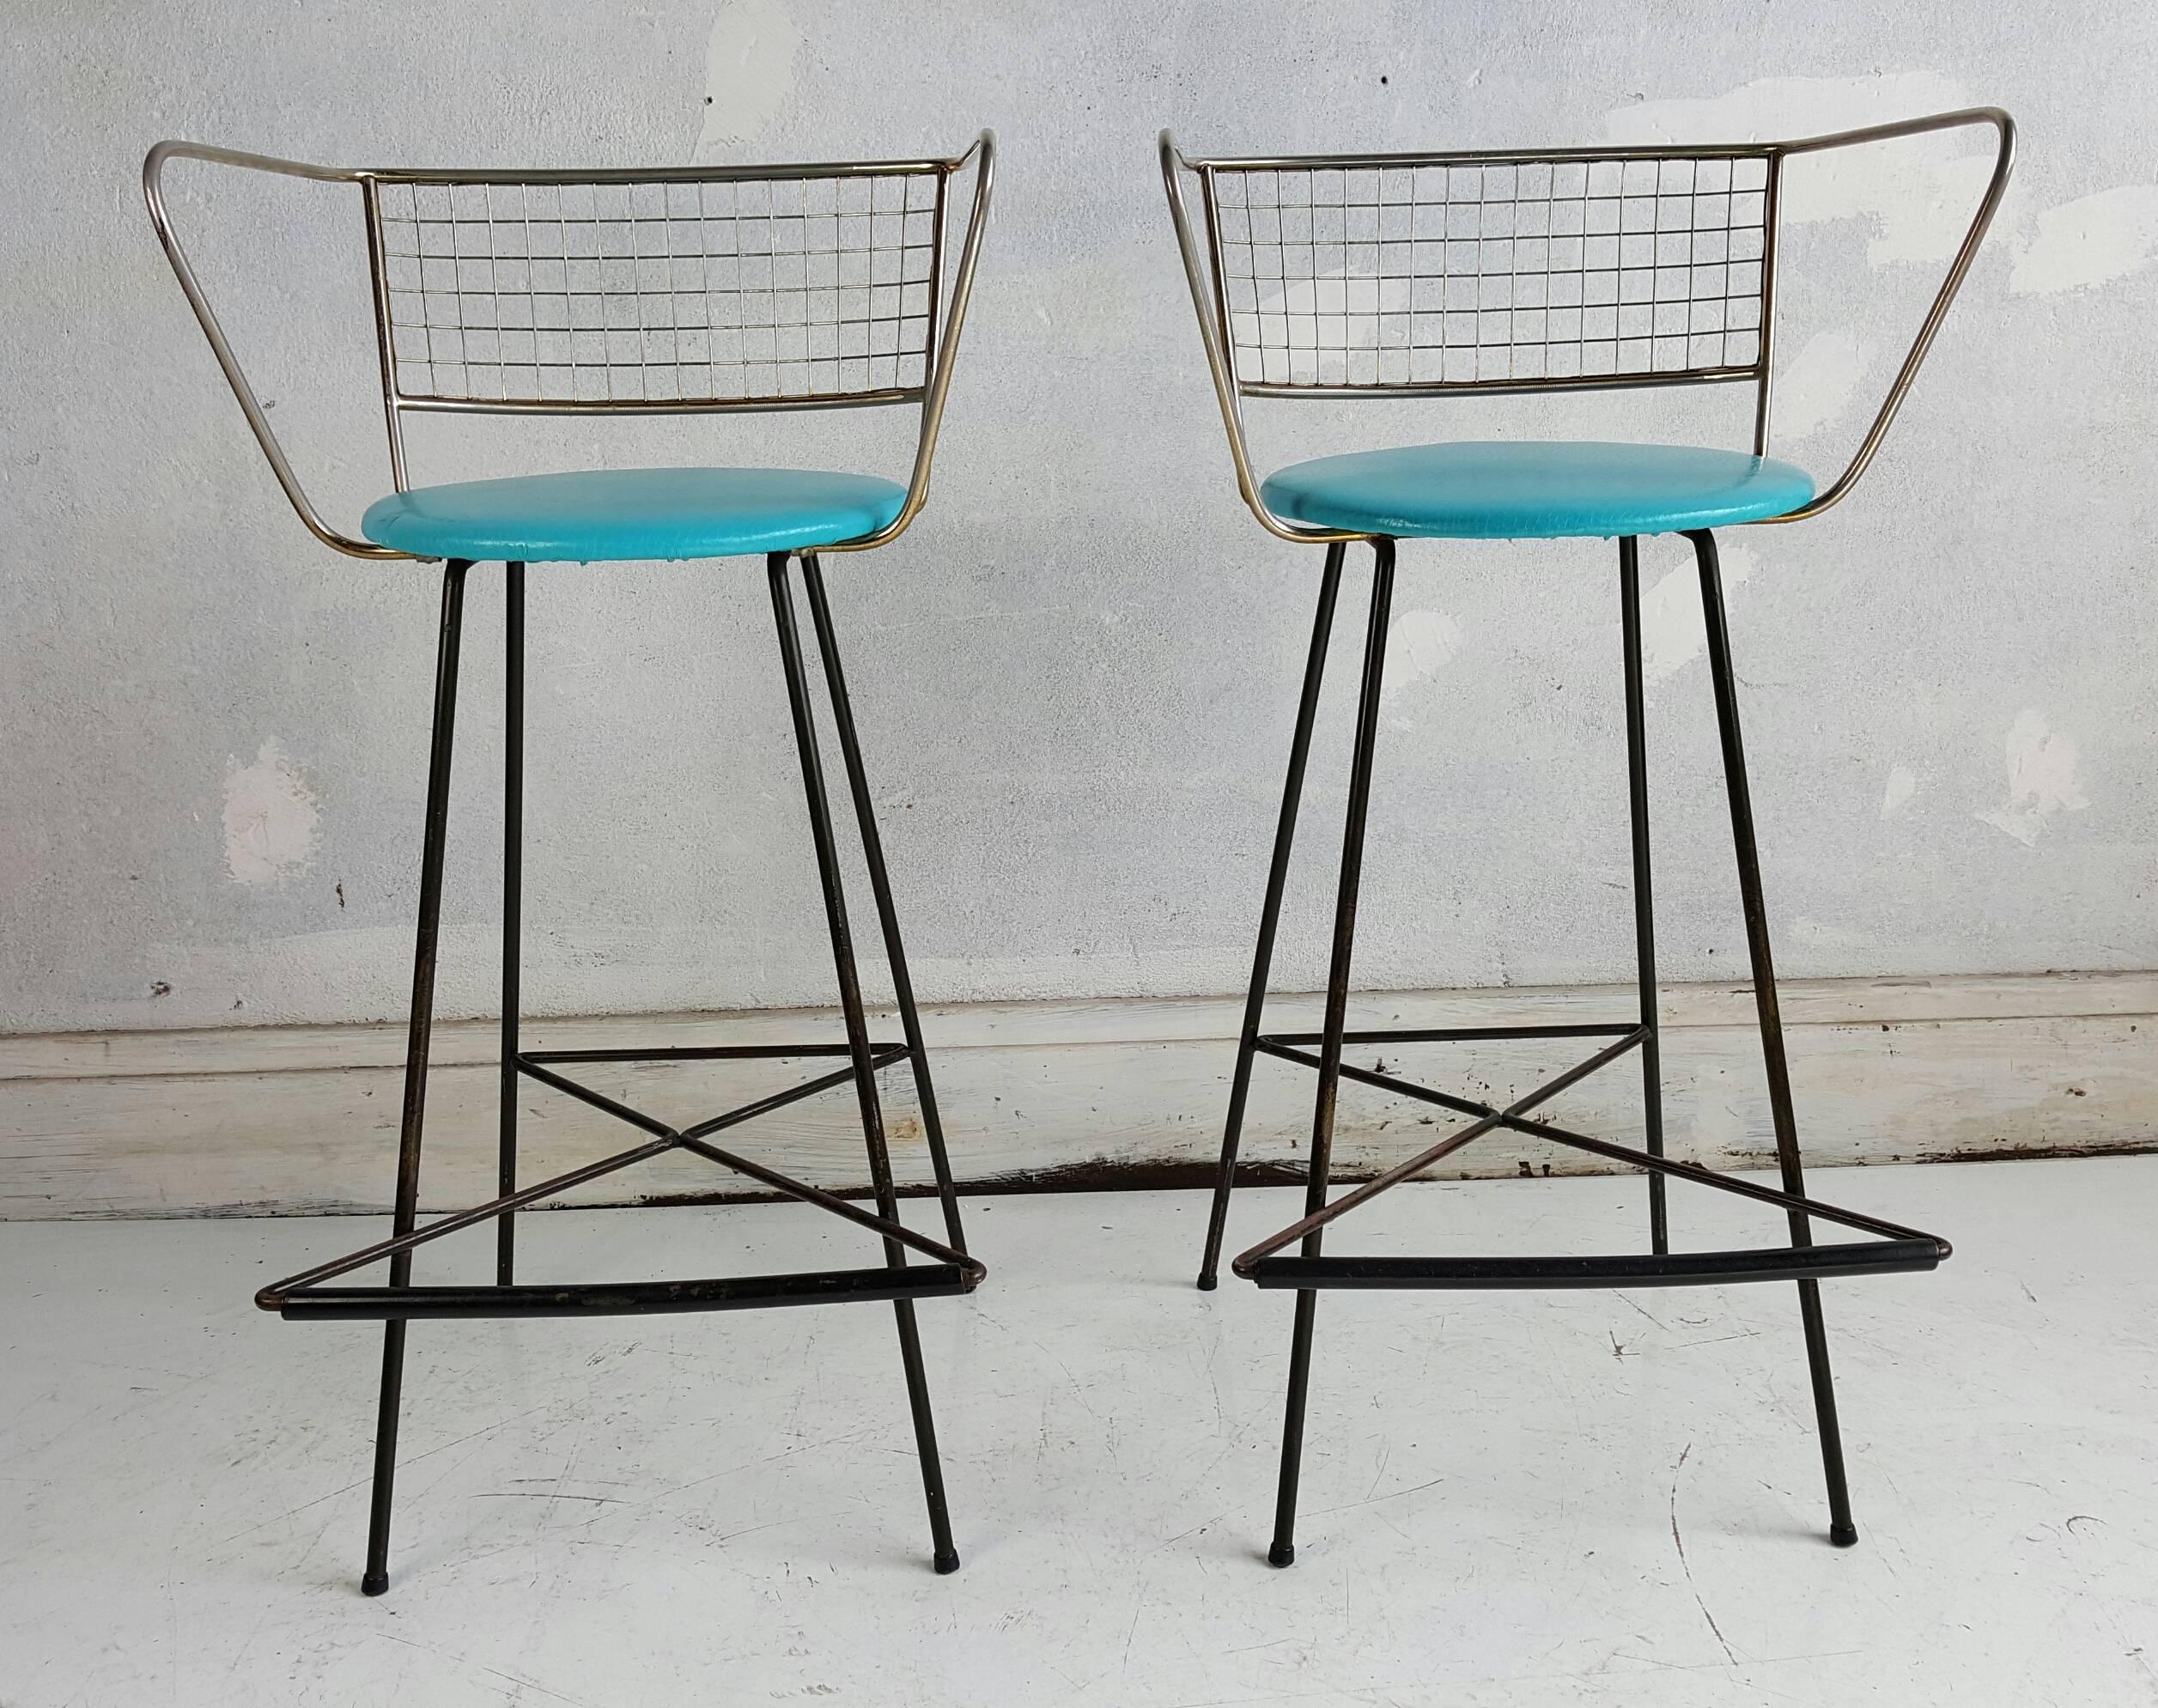 Amazing pair of Mid-Century Modern bar or counter stools. Right out of the Jetsons, Classic sculptural brass Bertoia like design seats. As well as giometric iron base design with elements of Frederick Weinberg, Tony Paul, etc. Stunning fun.